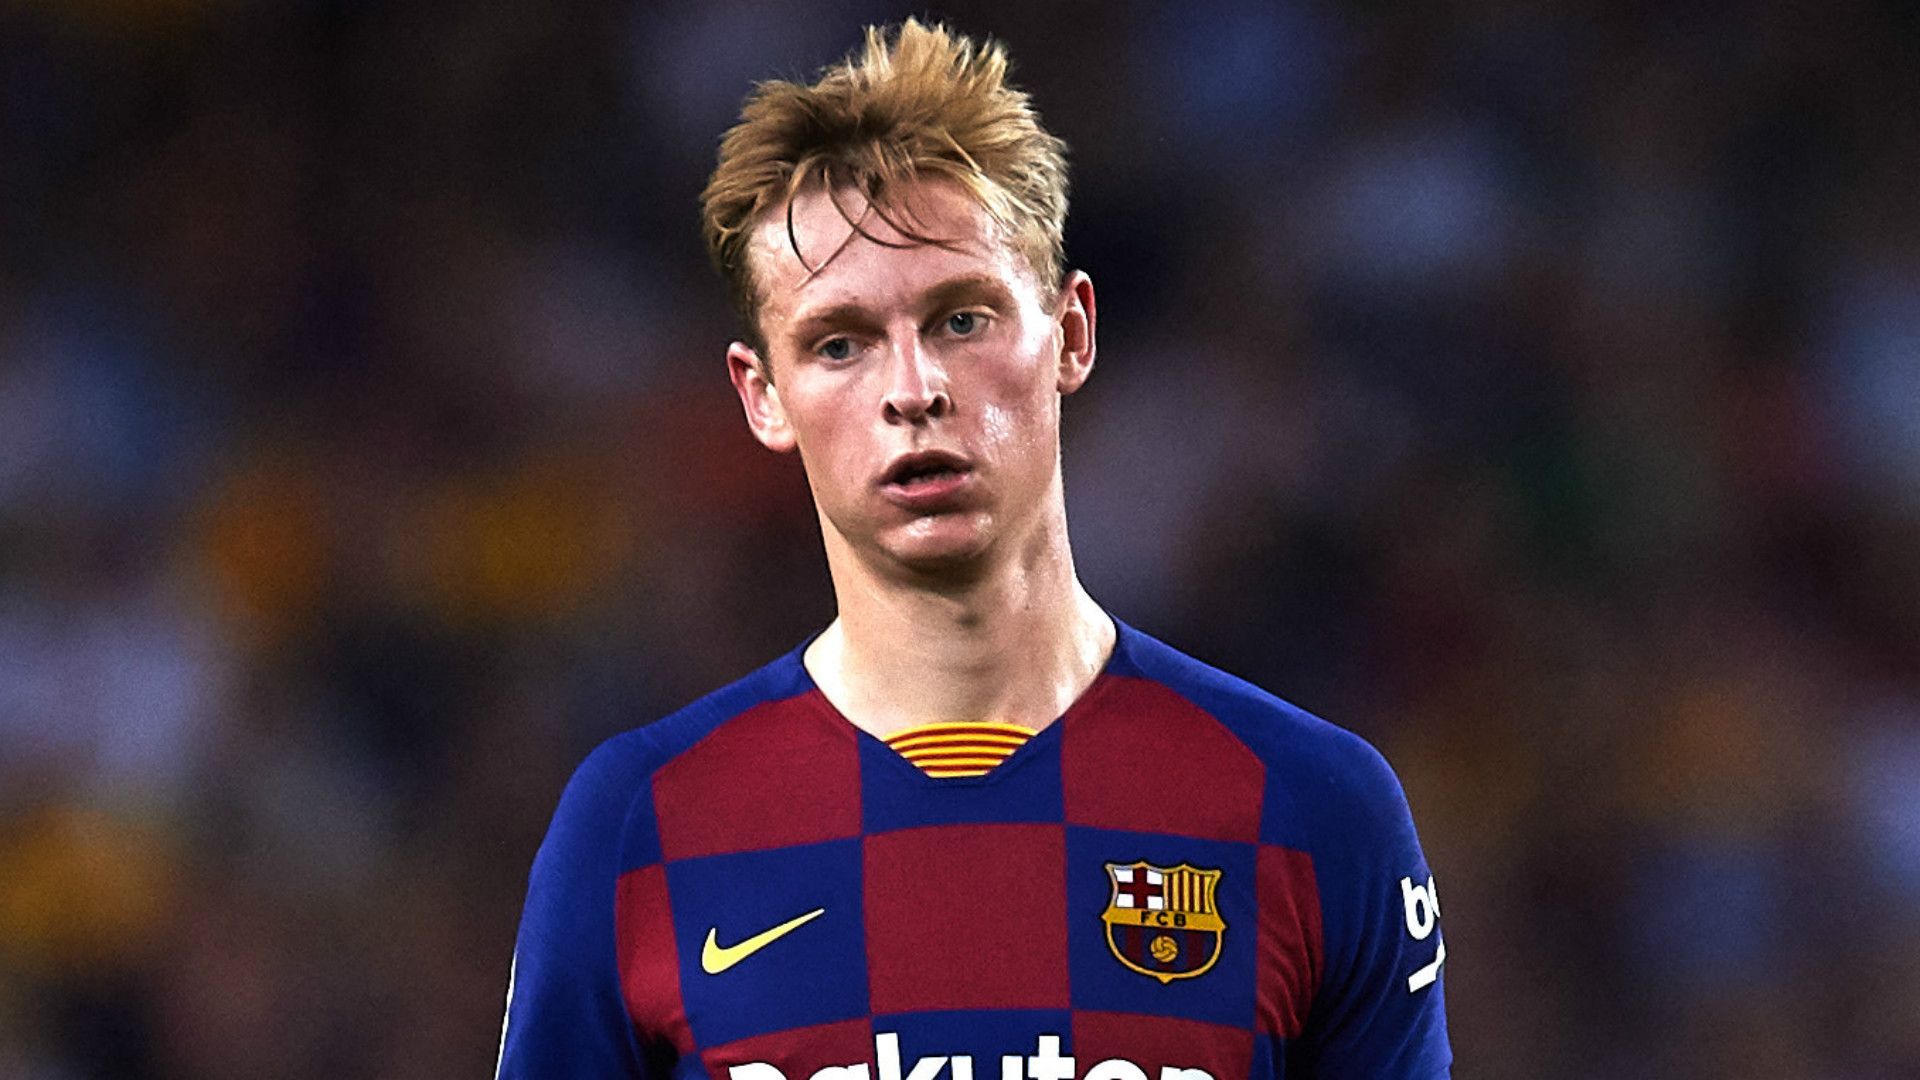 Barcelona news: 'If I'm not playing well, it's my fault' De Jong refuses to blame position change for underwhelming La Liga form after move from Ajax